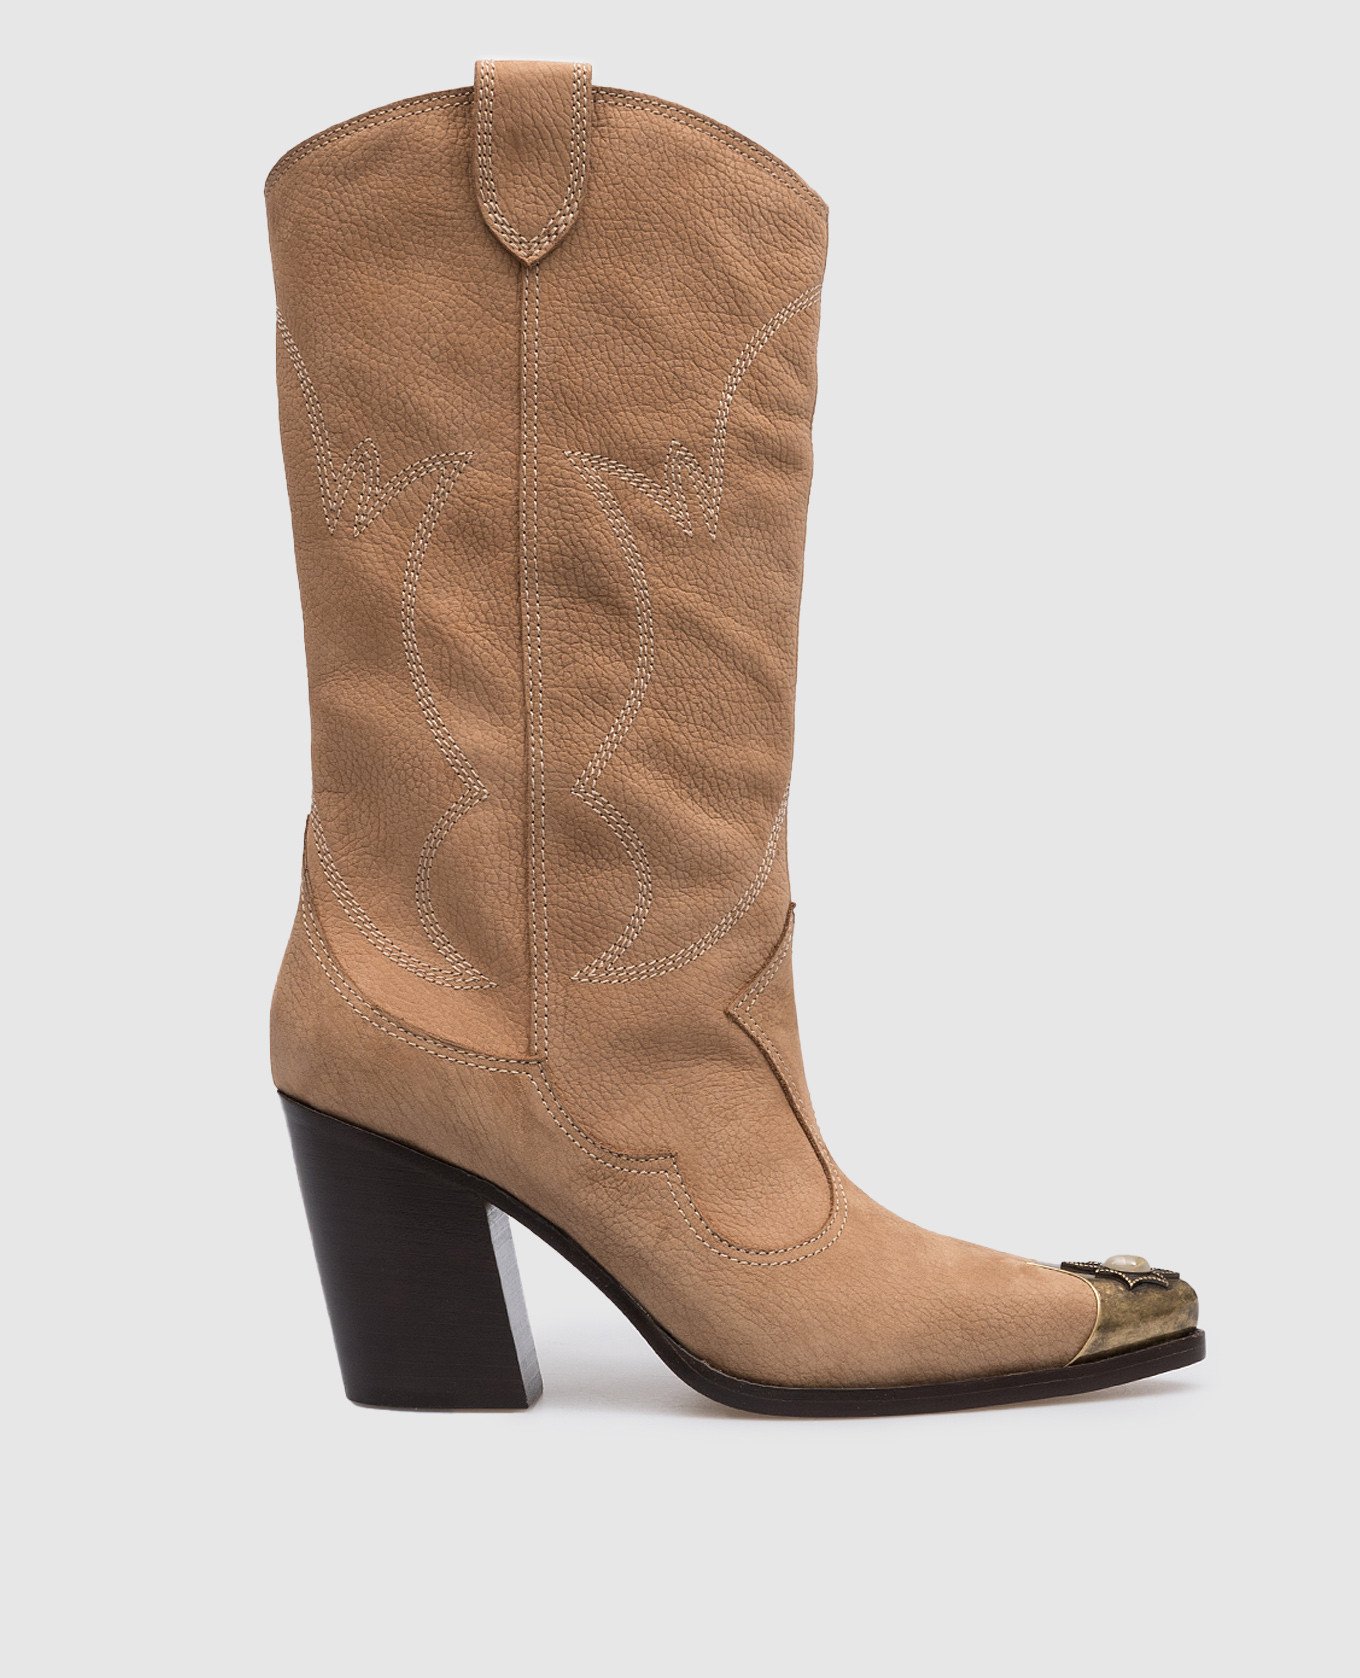 Brown leather boots with metal trim